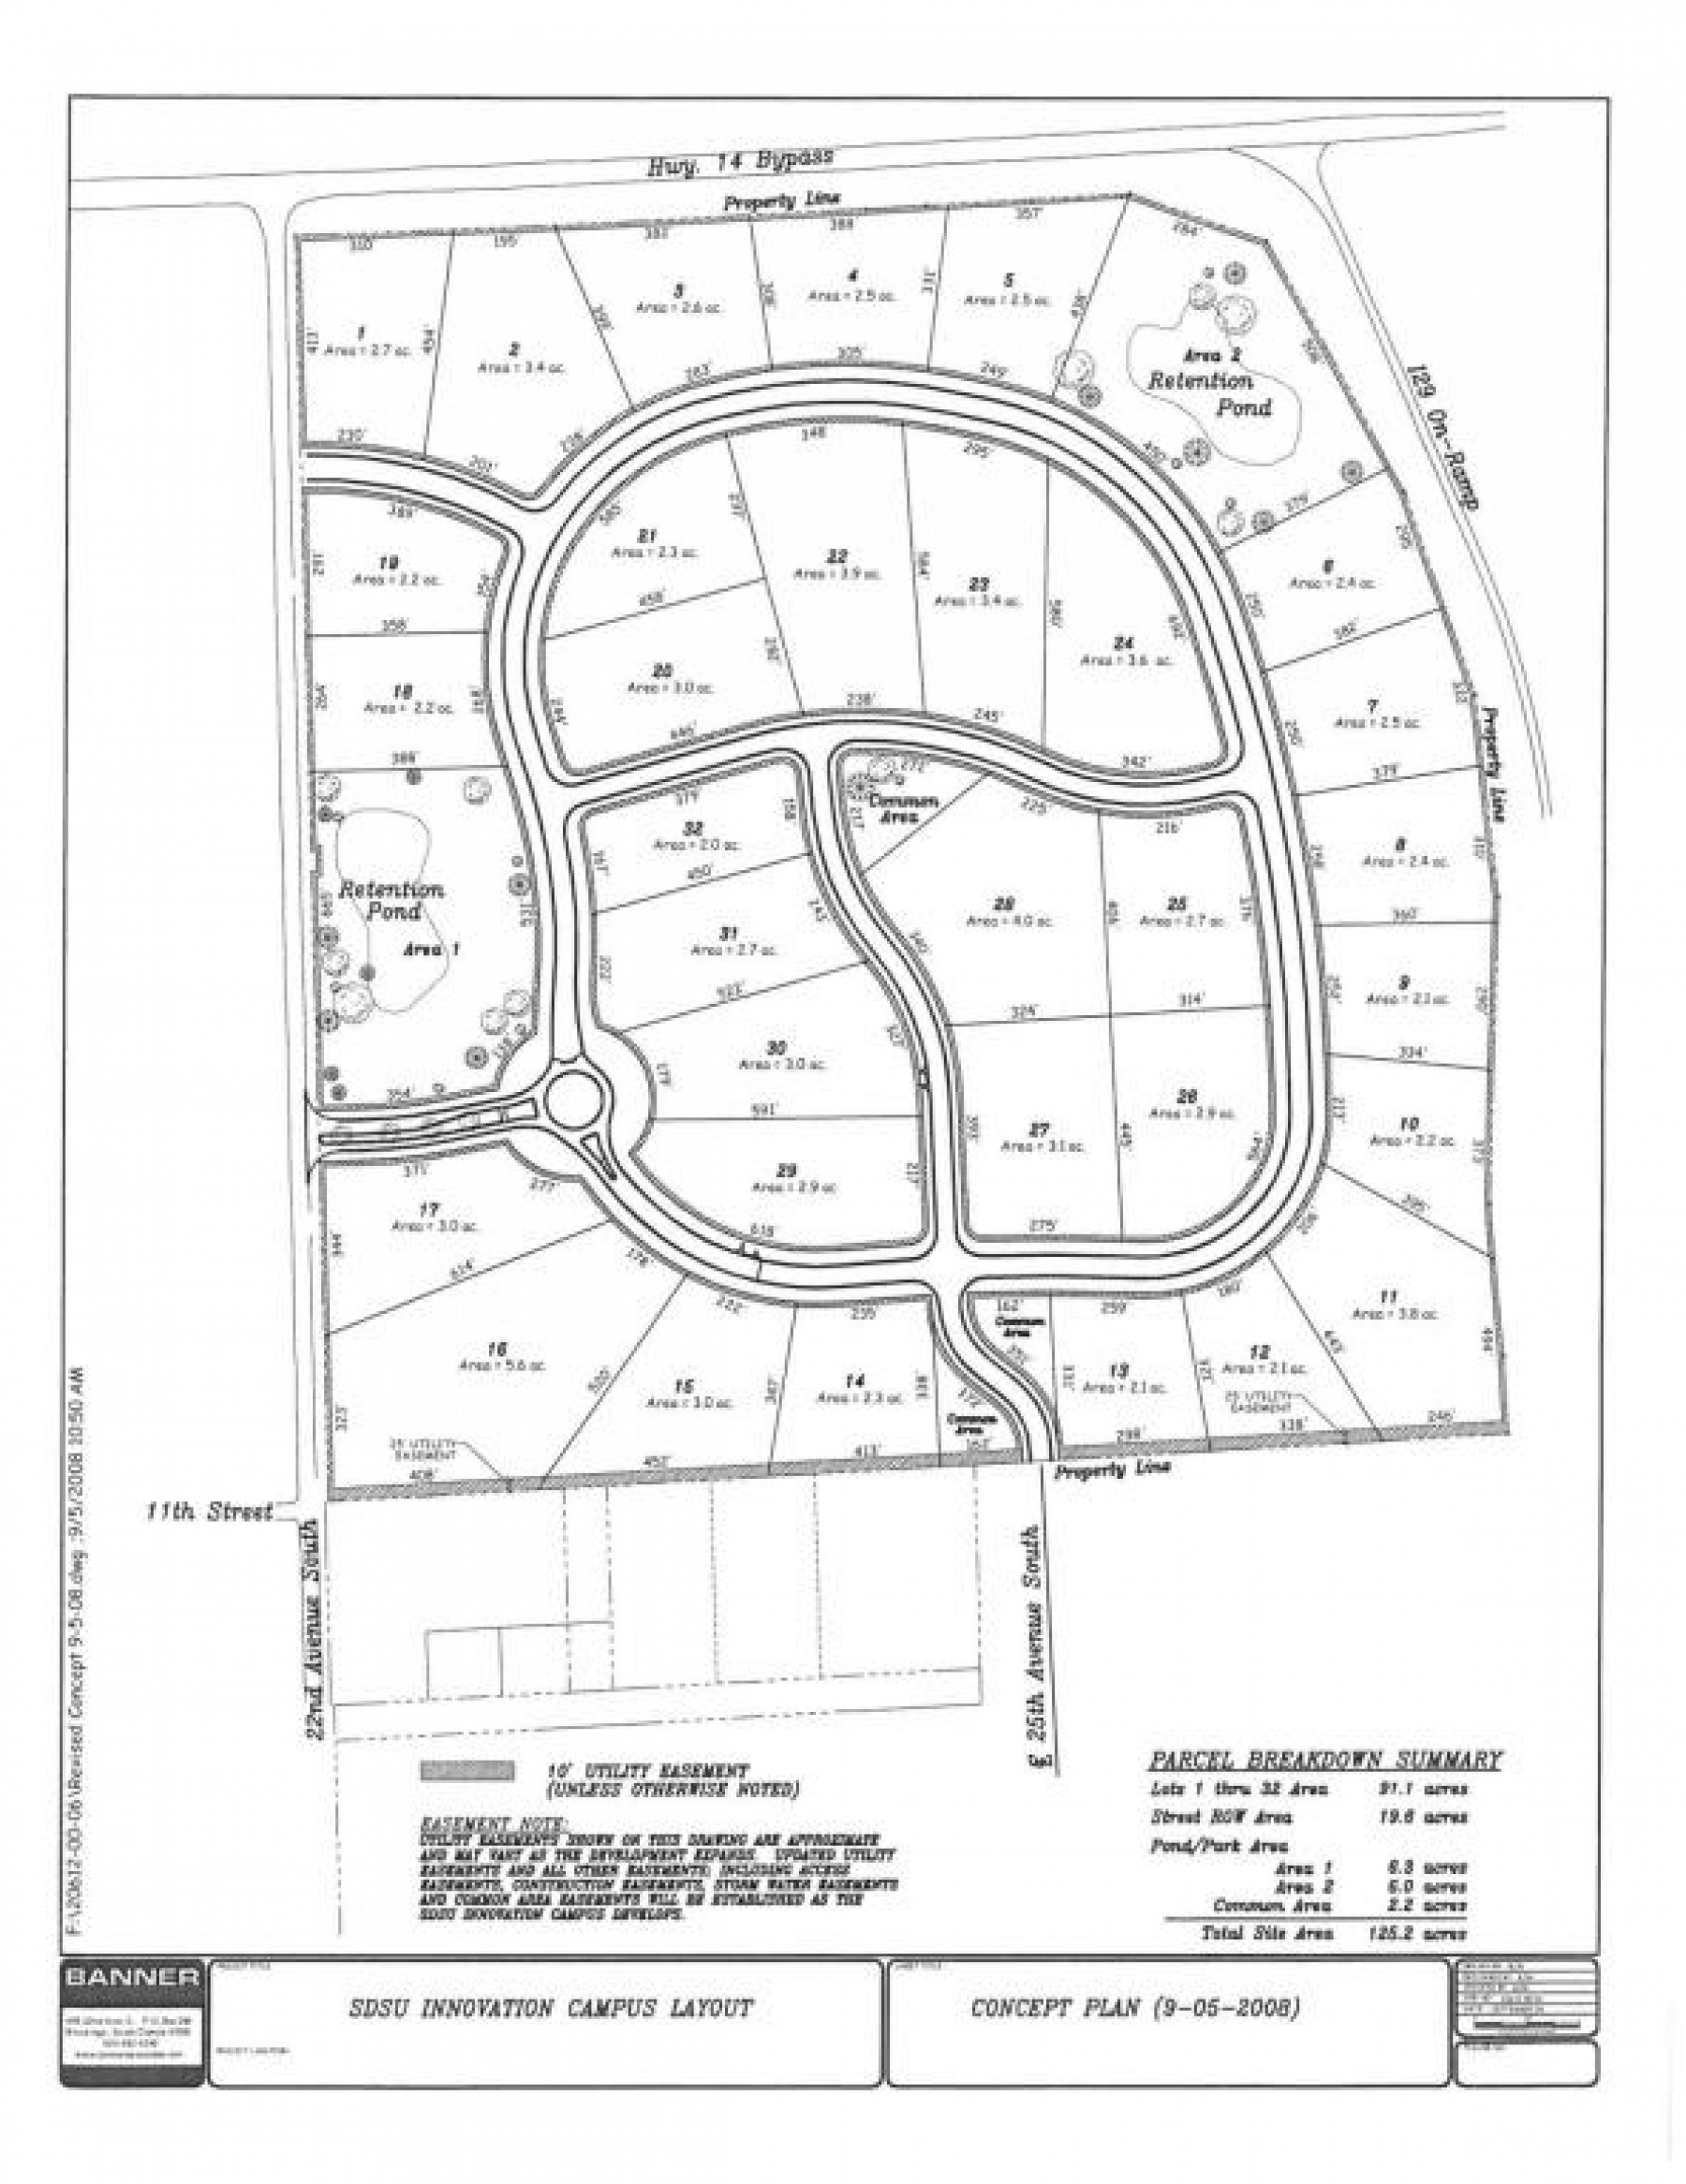 Lot 26 Innovation Campus, Brookings, SD 57006